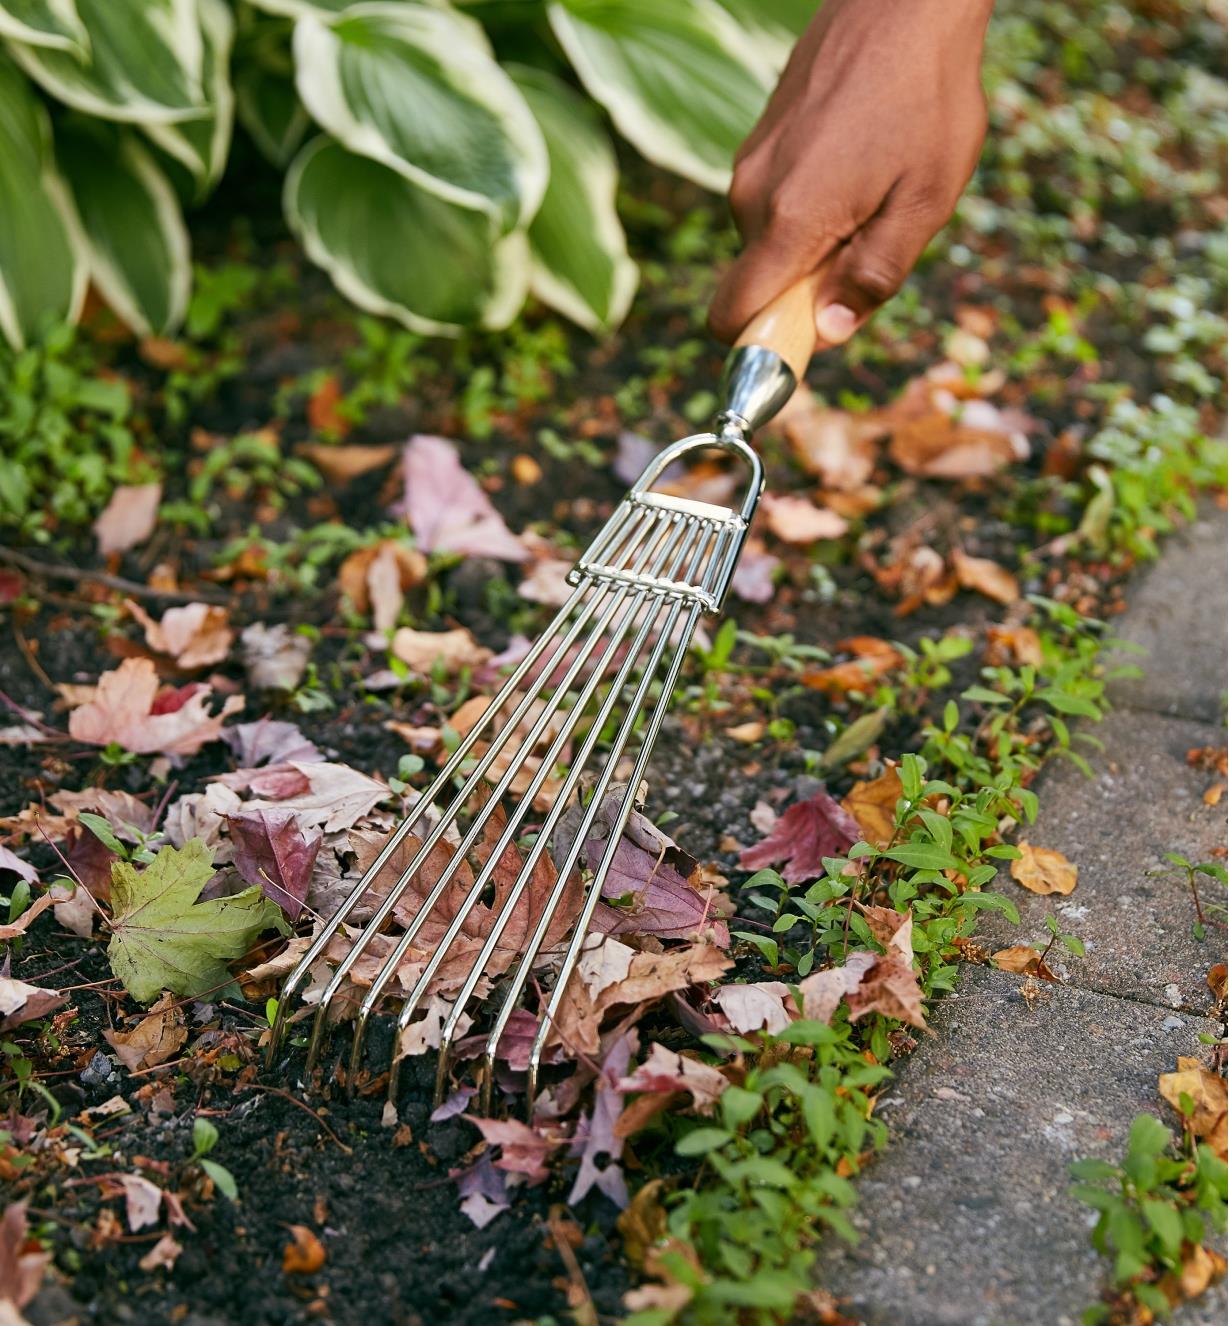 Clearing leaves from a garden bed using the Lee Valley hand rake